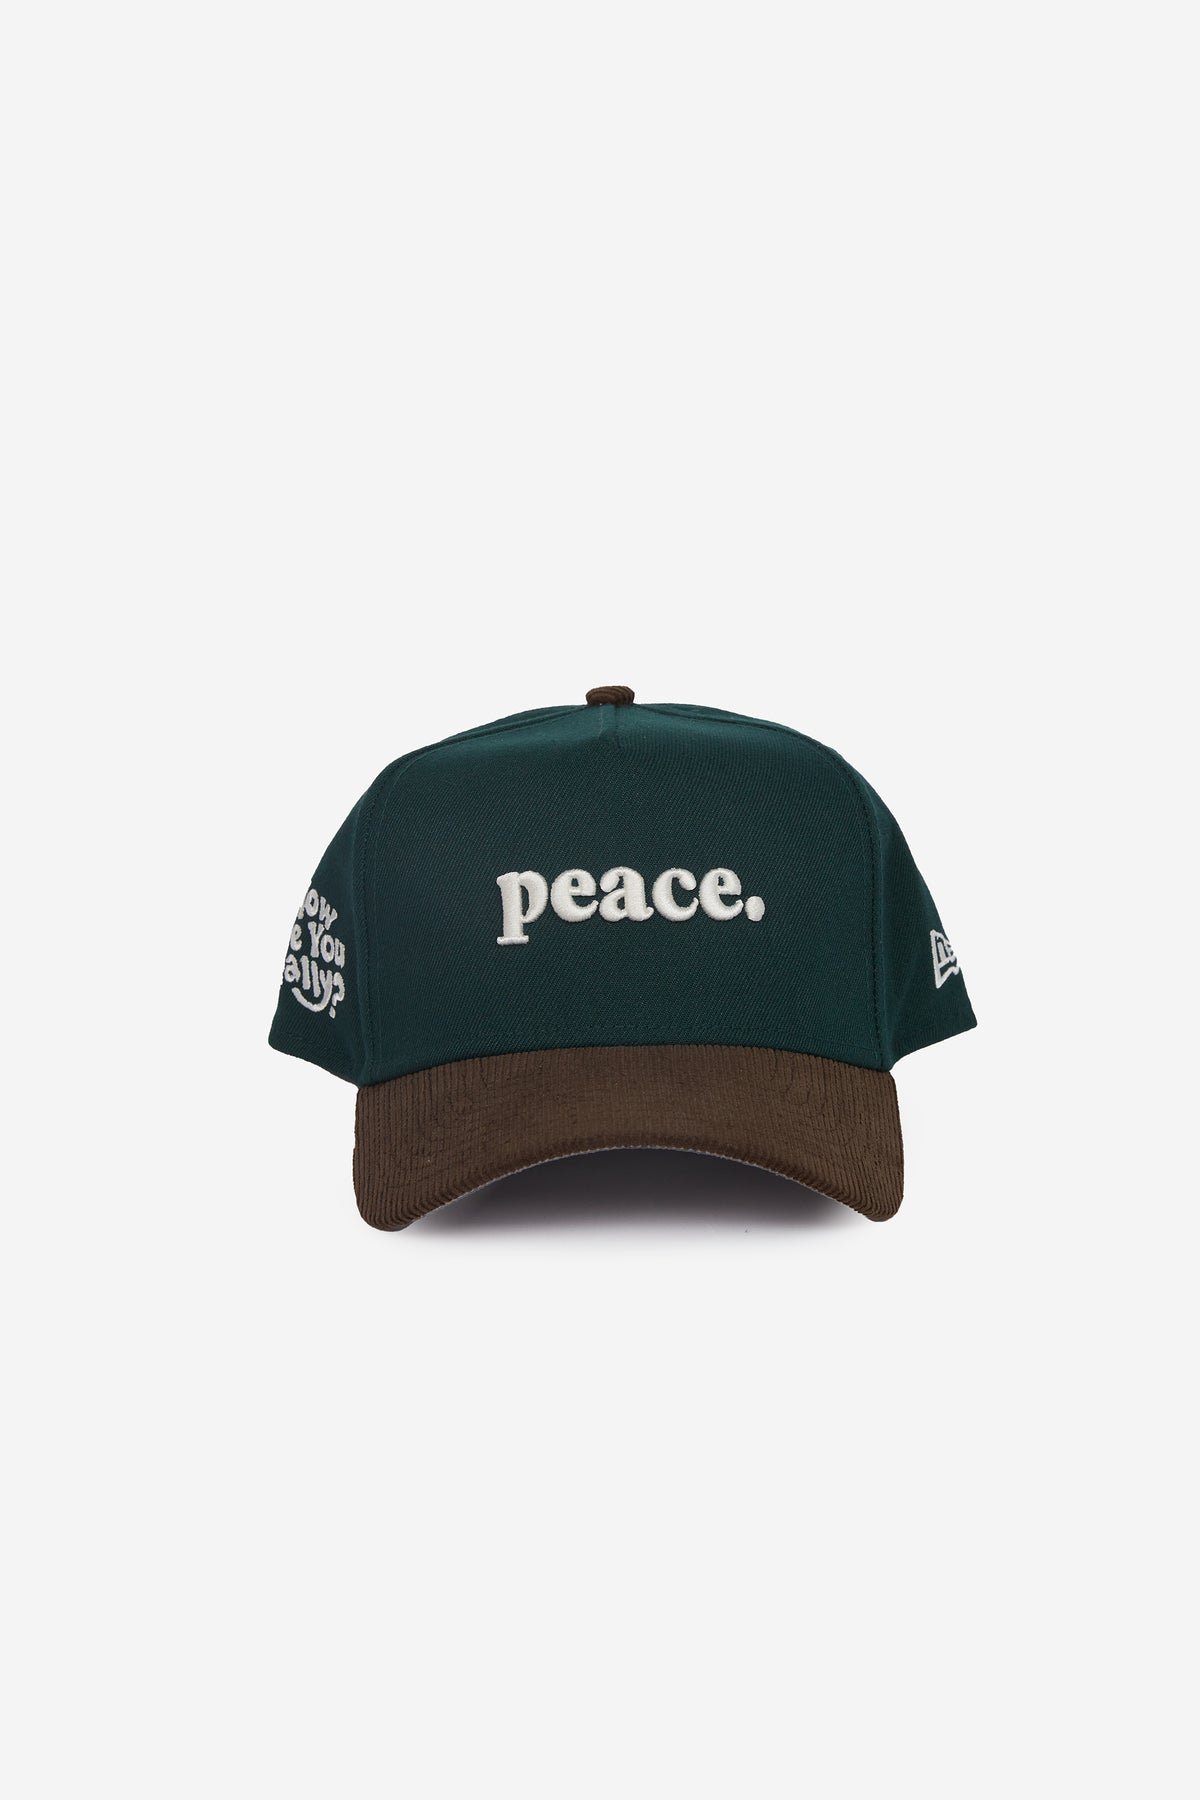 Peace How Are You Really 9FORTY A-Frame Cap - Dark Green/Walnut